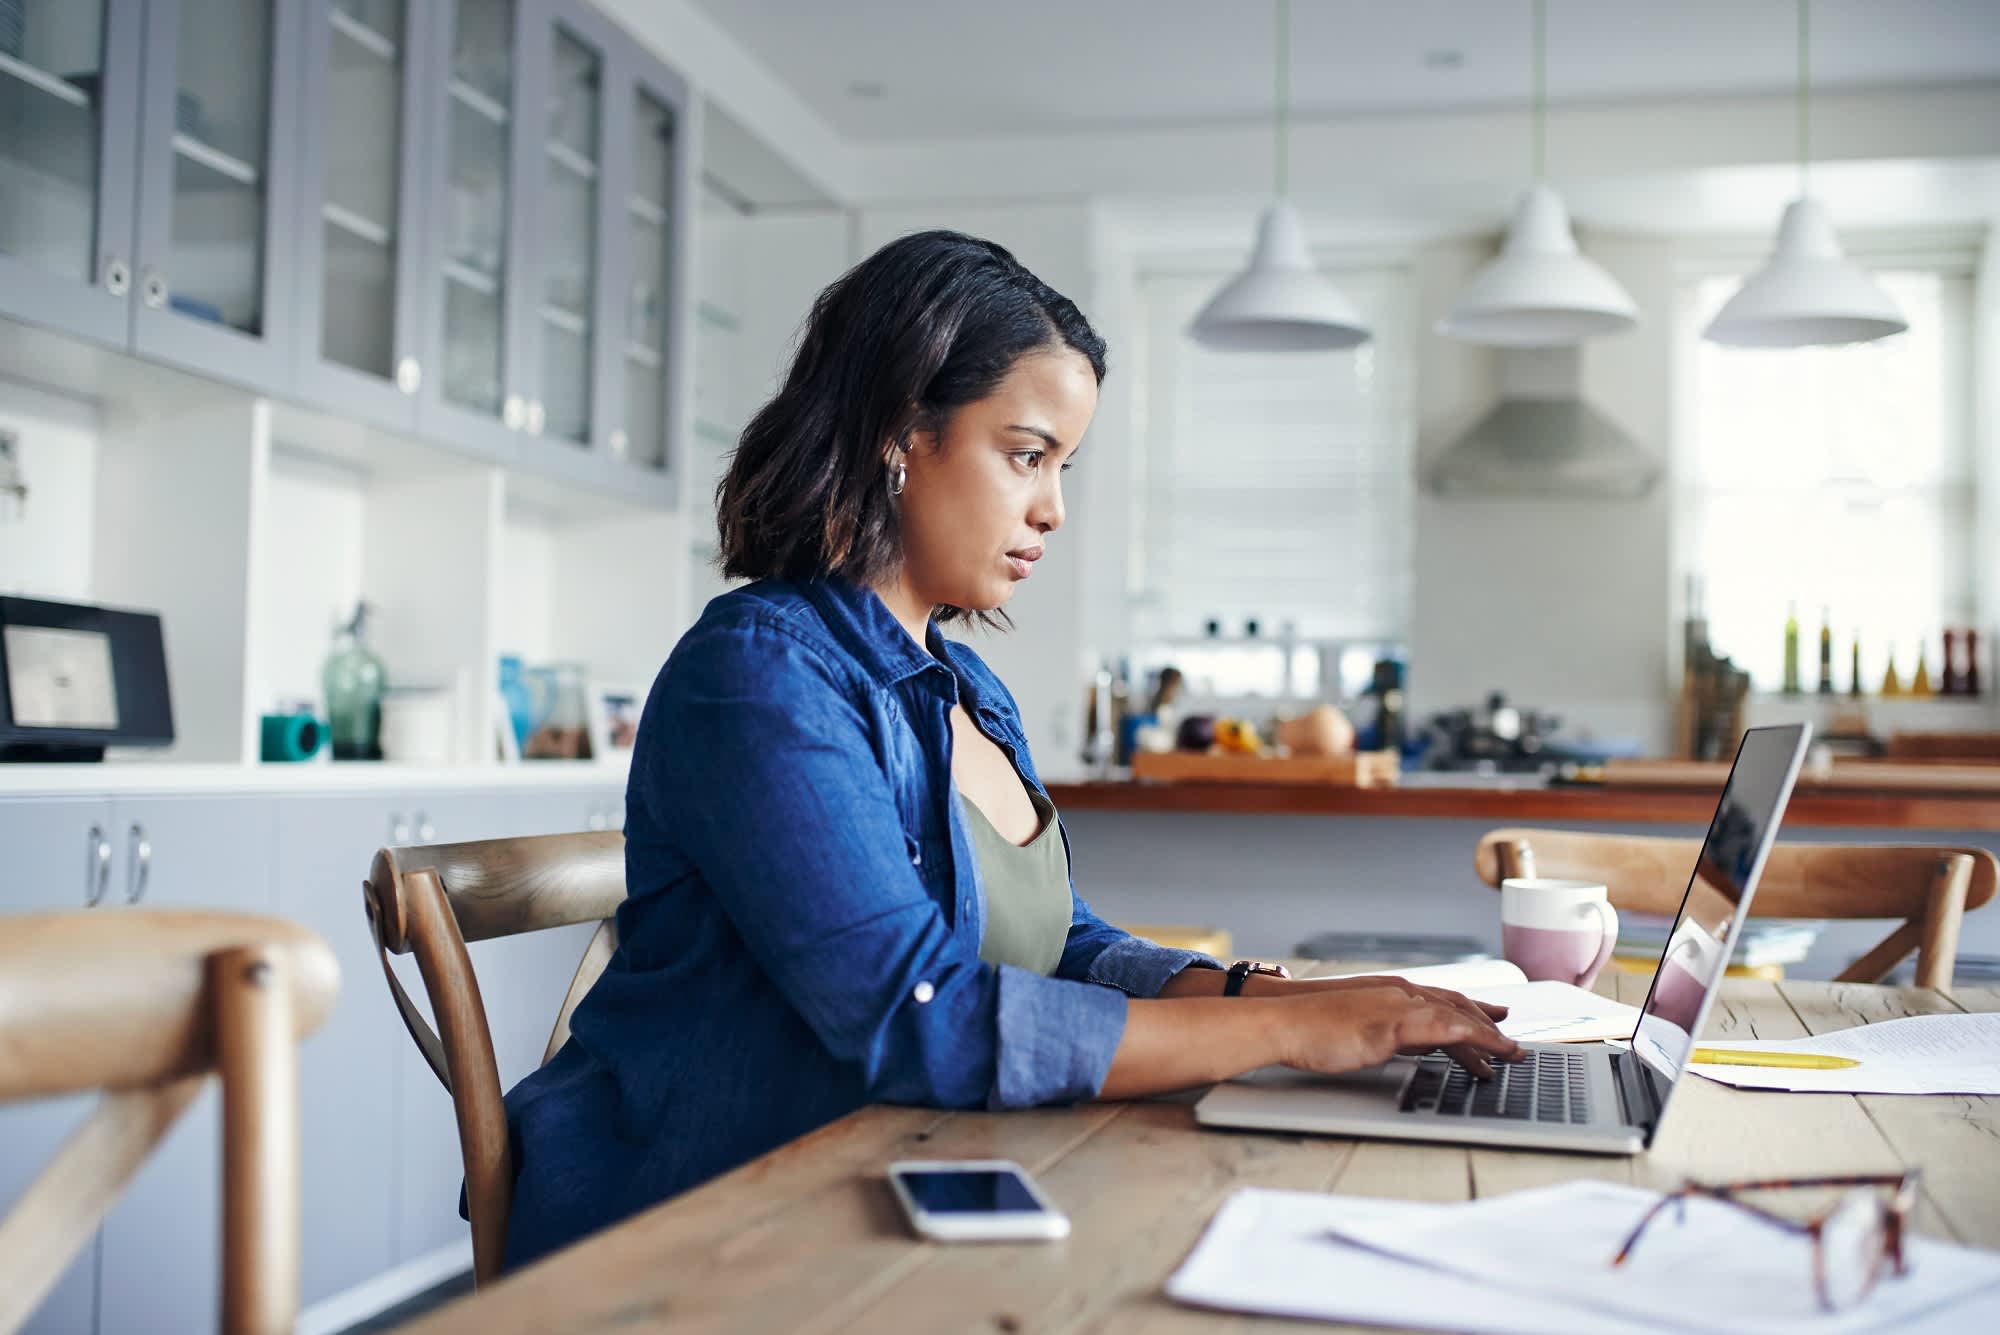 7 high-paying work-from-home jobs all pay $90,000 a year or more